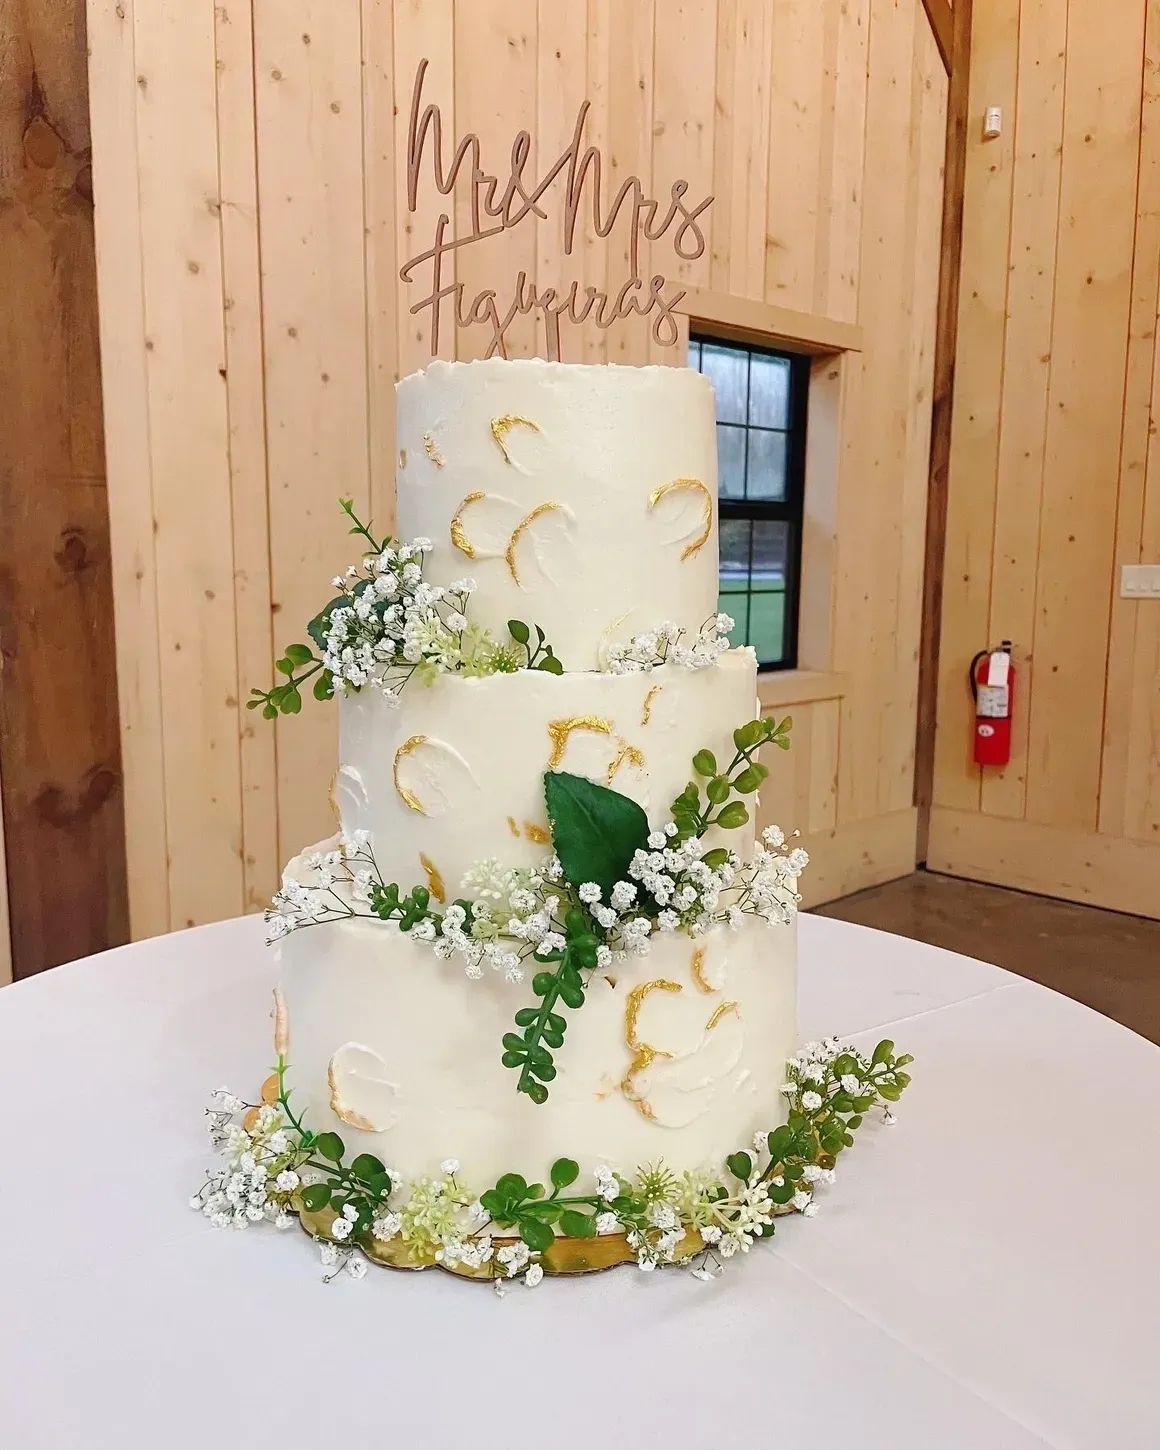 A three layer cake with greenery and flowers on top.